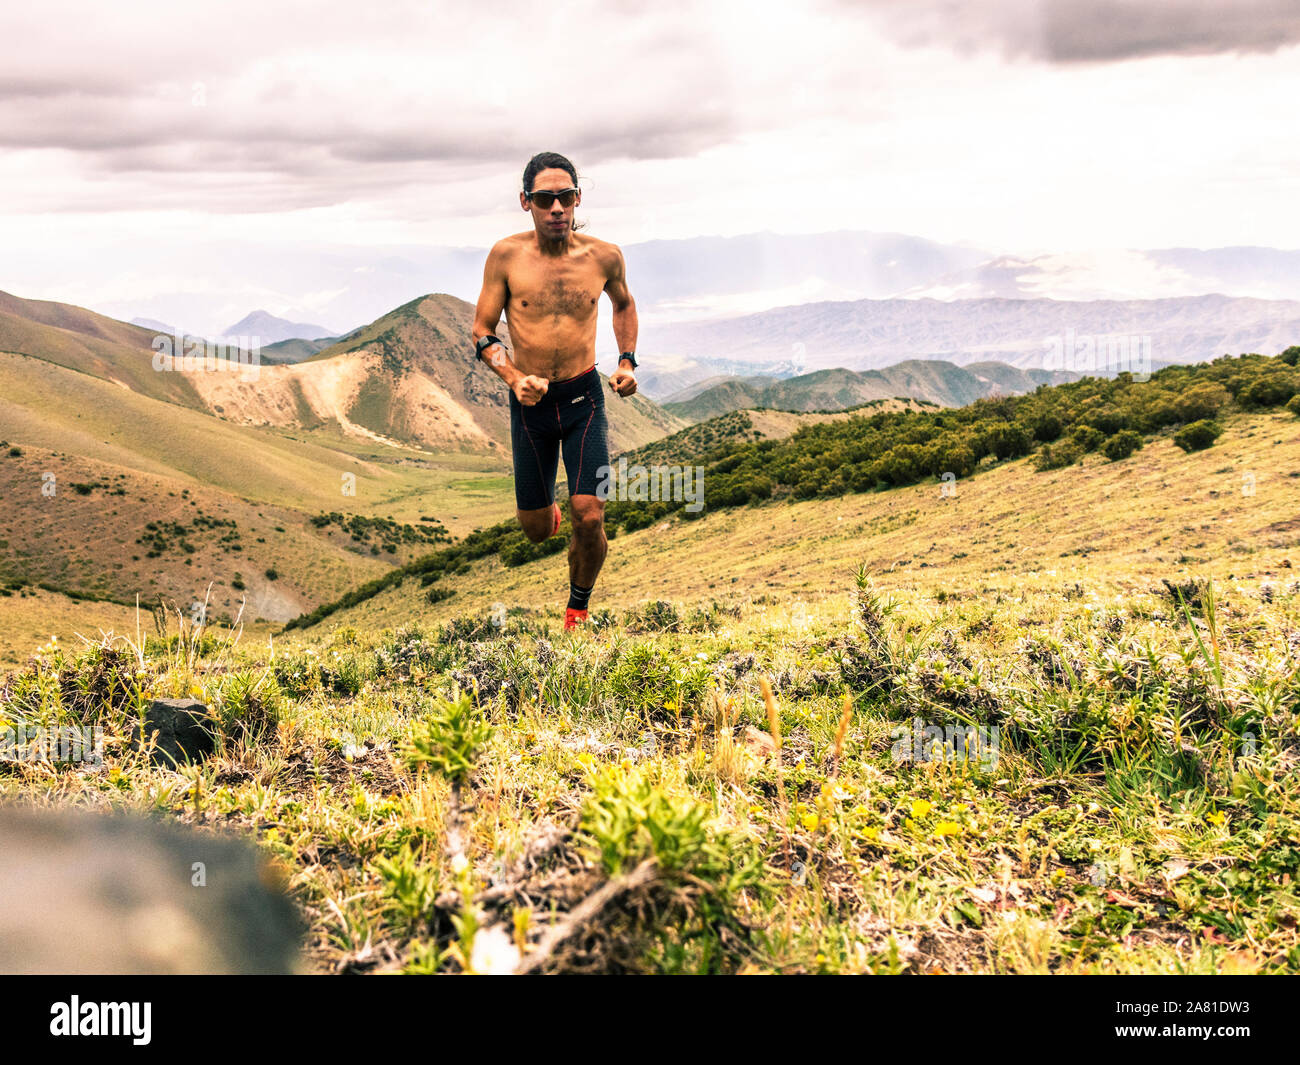 Male trail runner in the Andes Mountains near Potrerillos, Argentina. Stock Photo